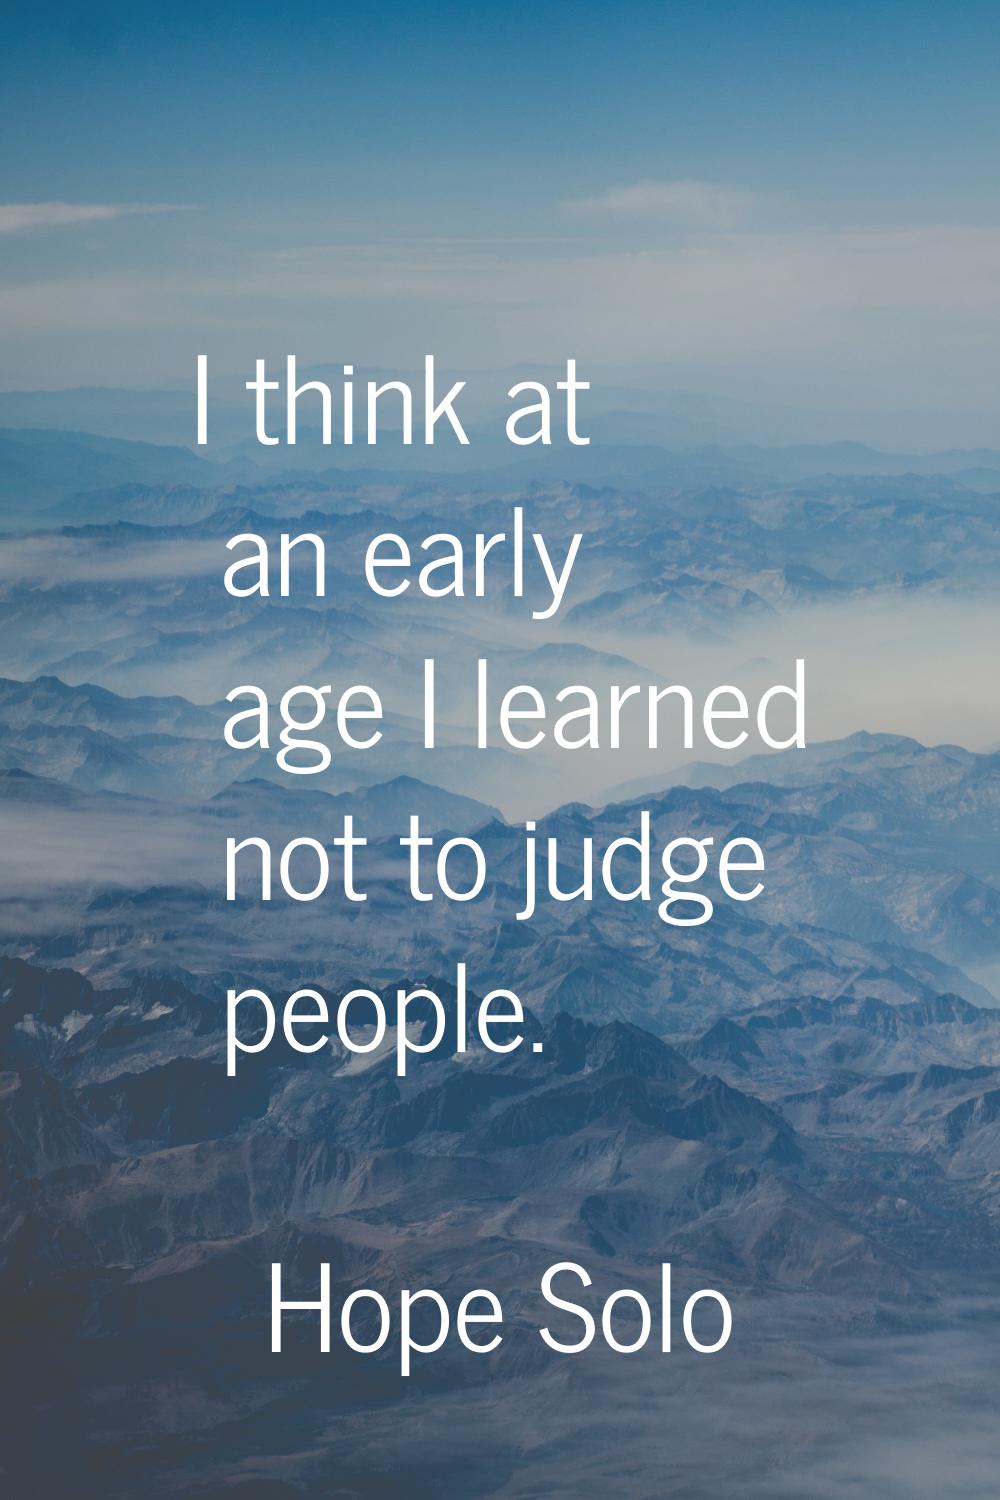 I think at an early age I learned not to judge people.